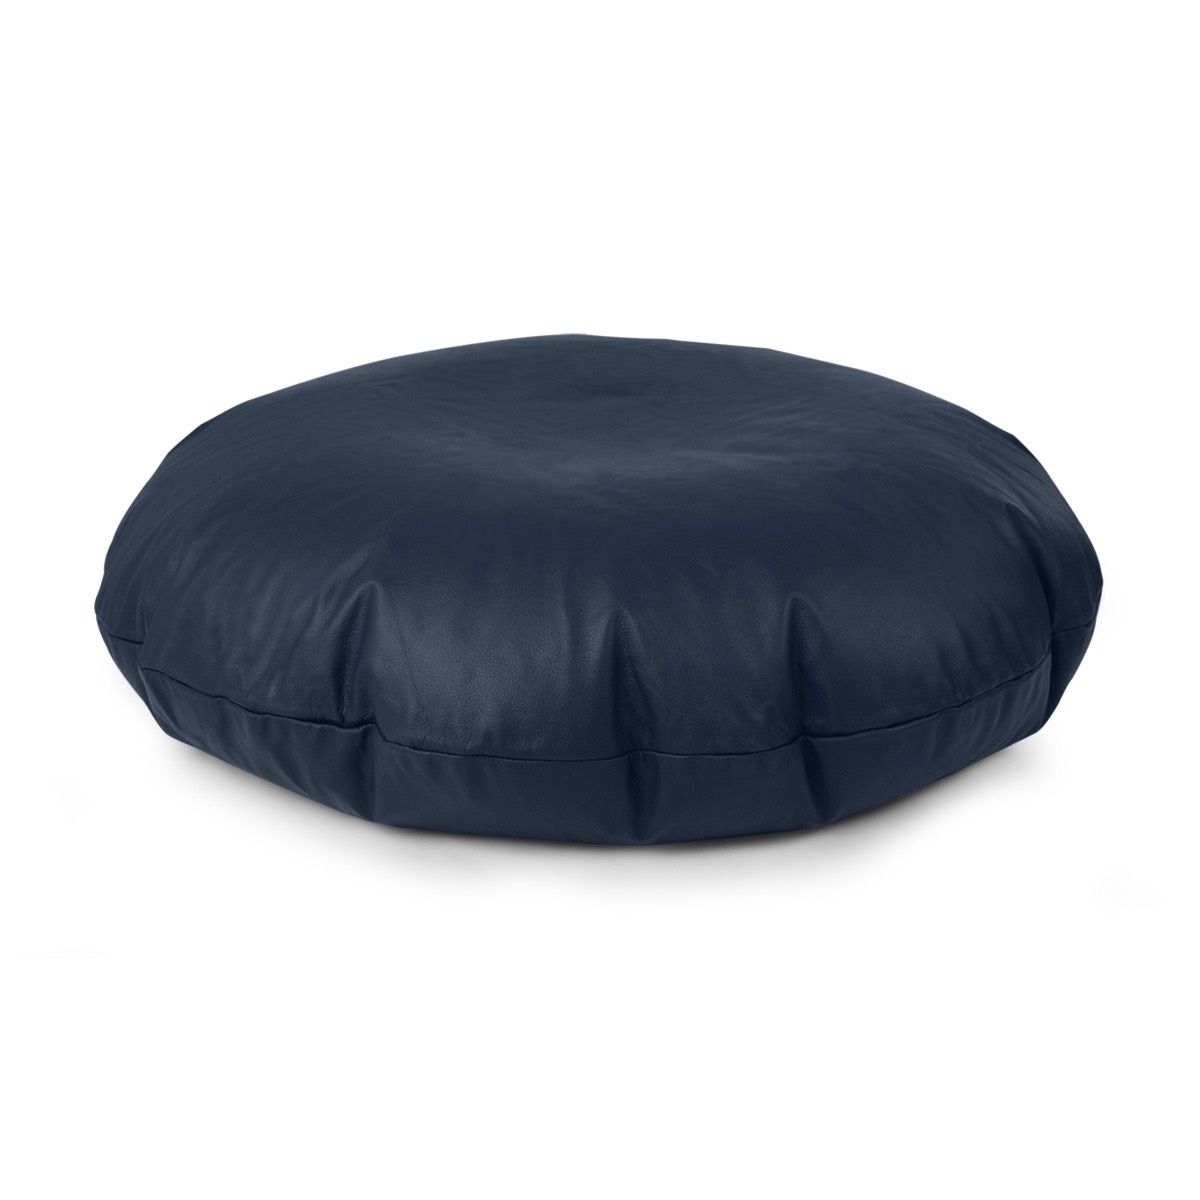 Real Leather Cushion Bean Bag Round, Real Leather Bean Bag Chairs